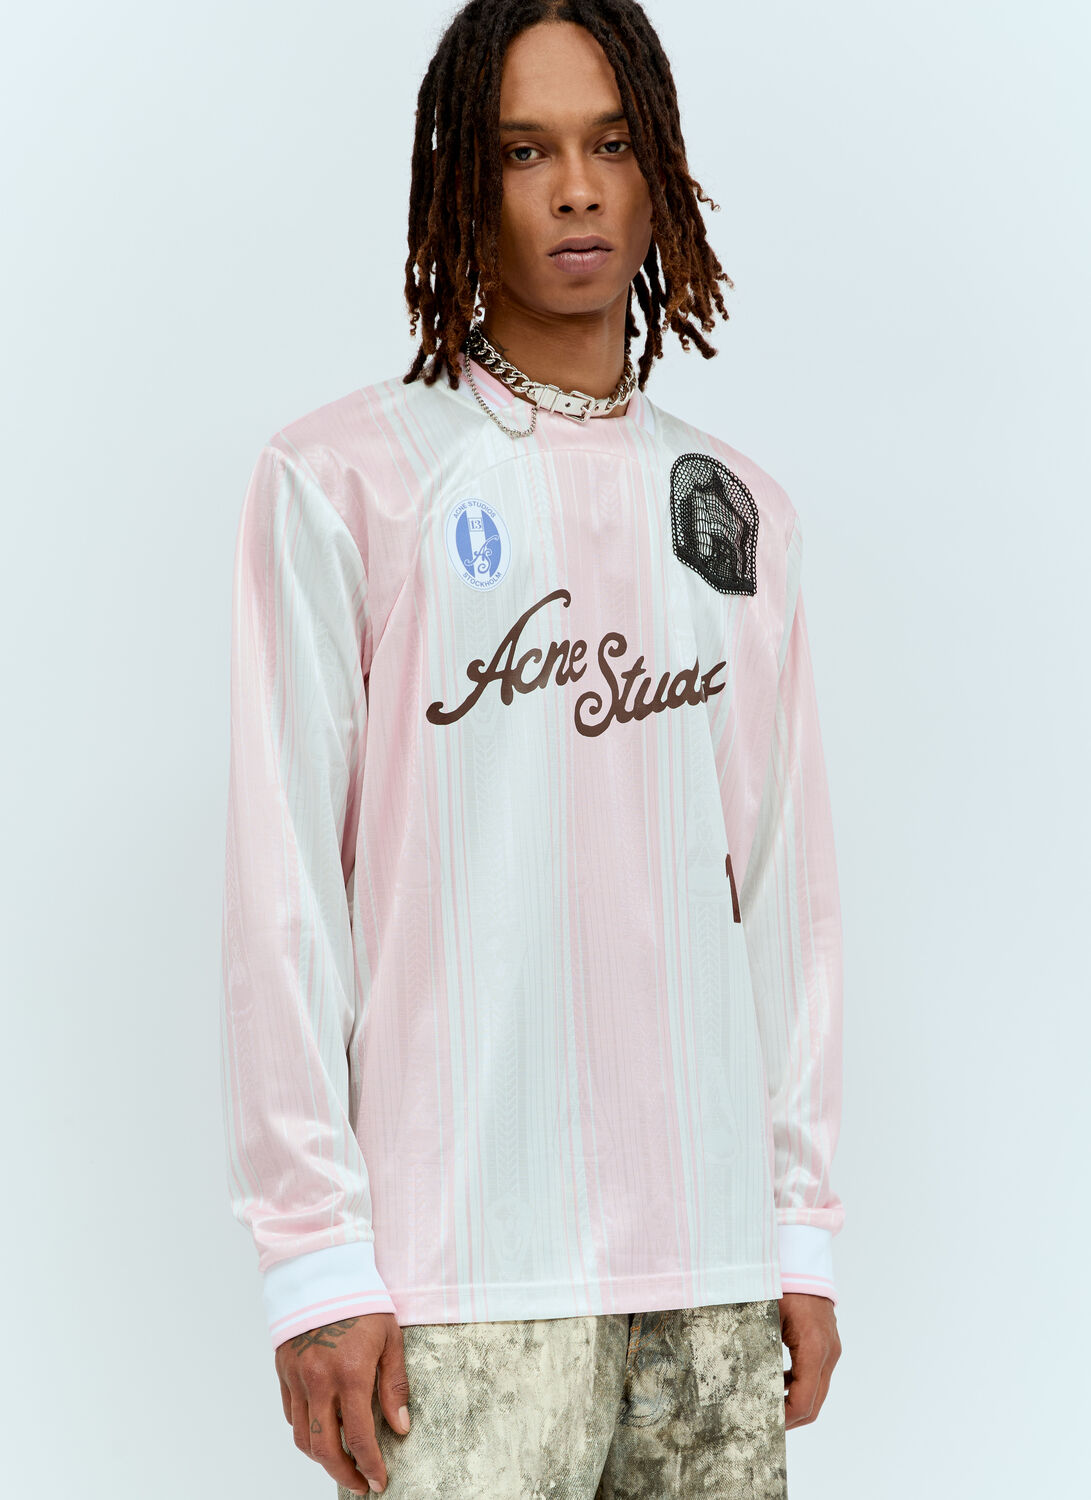 Acne Studios Striped Football Jersey In White